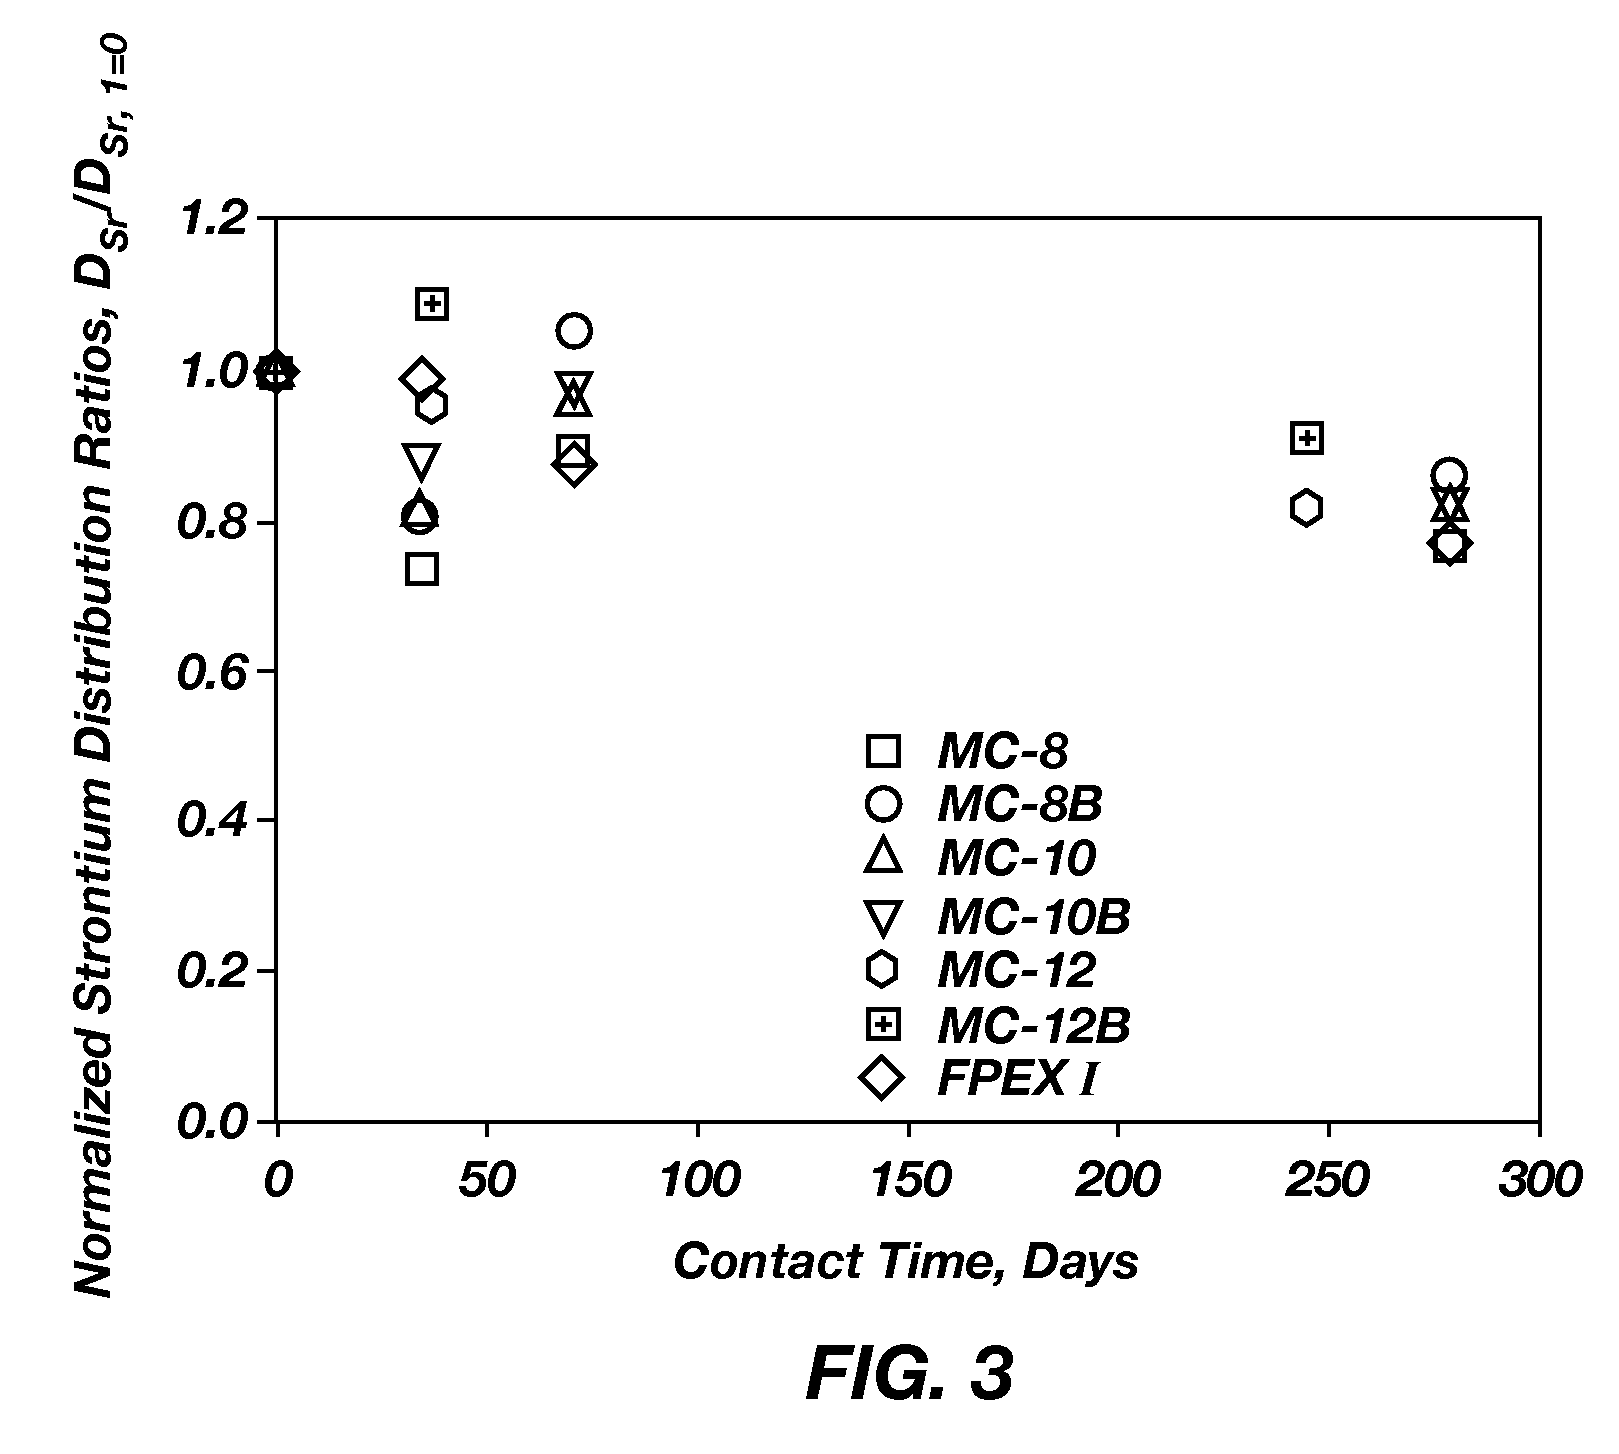 Extractant compositions for co-extracting cesium and strontium, a method of separating cesium and strontium from an aqueous feed, and calixarene compounds